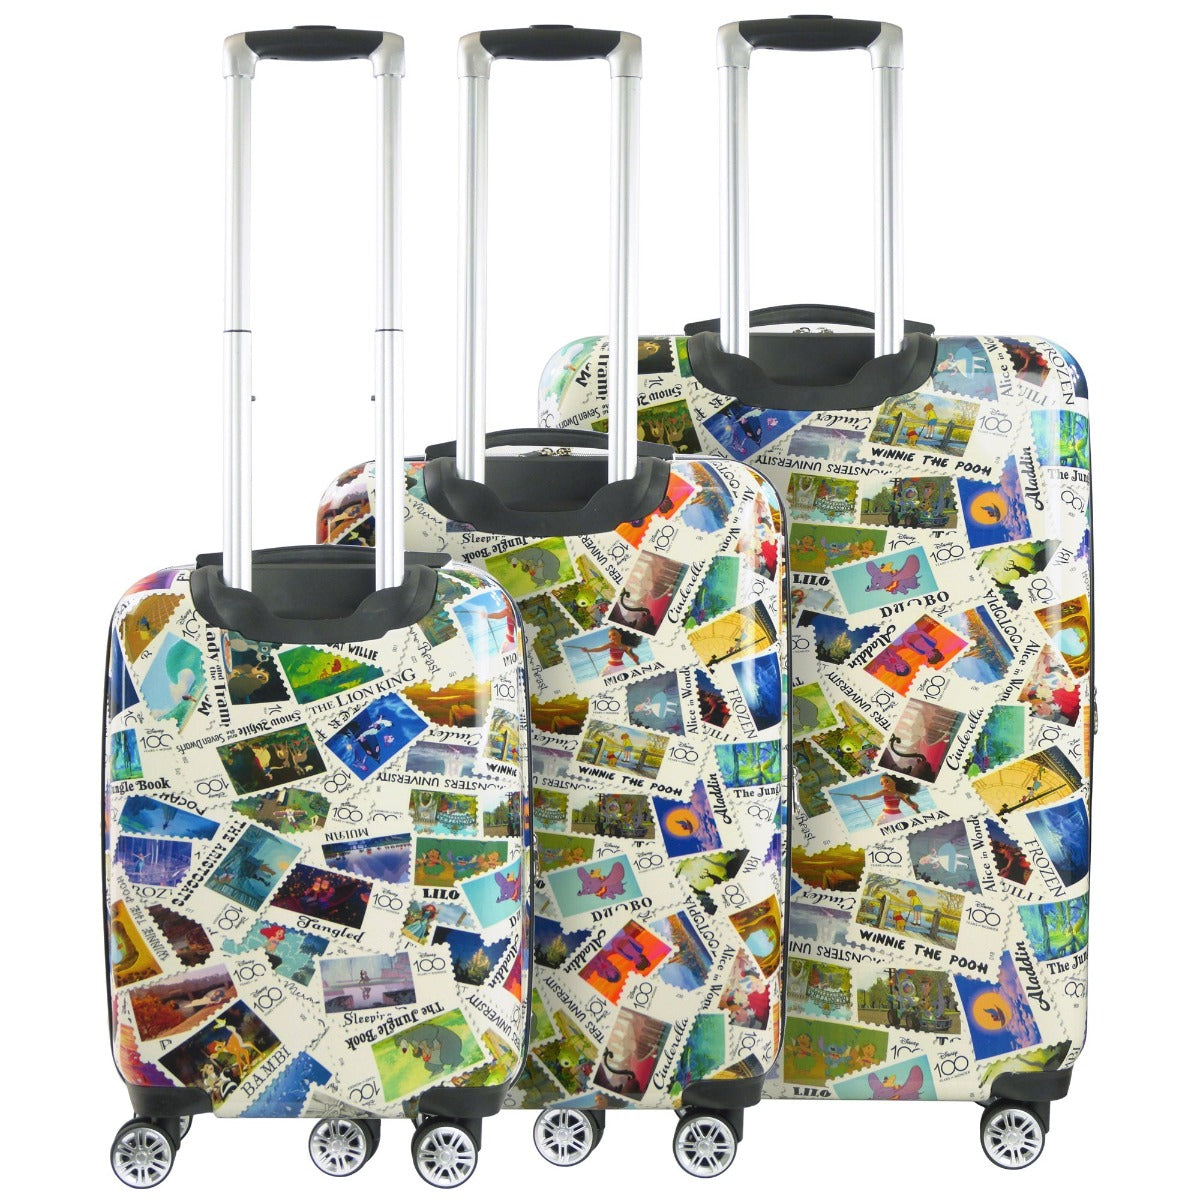 Ful Disney 100 Year Anniversary Limited Edition Stamps ABS 3 piece Hardsided Spinner Suitcase Set carry on checked luggage 360 degree wheels retractable handle